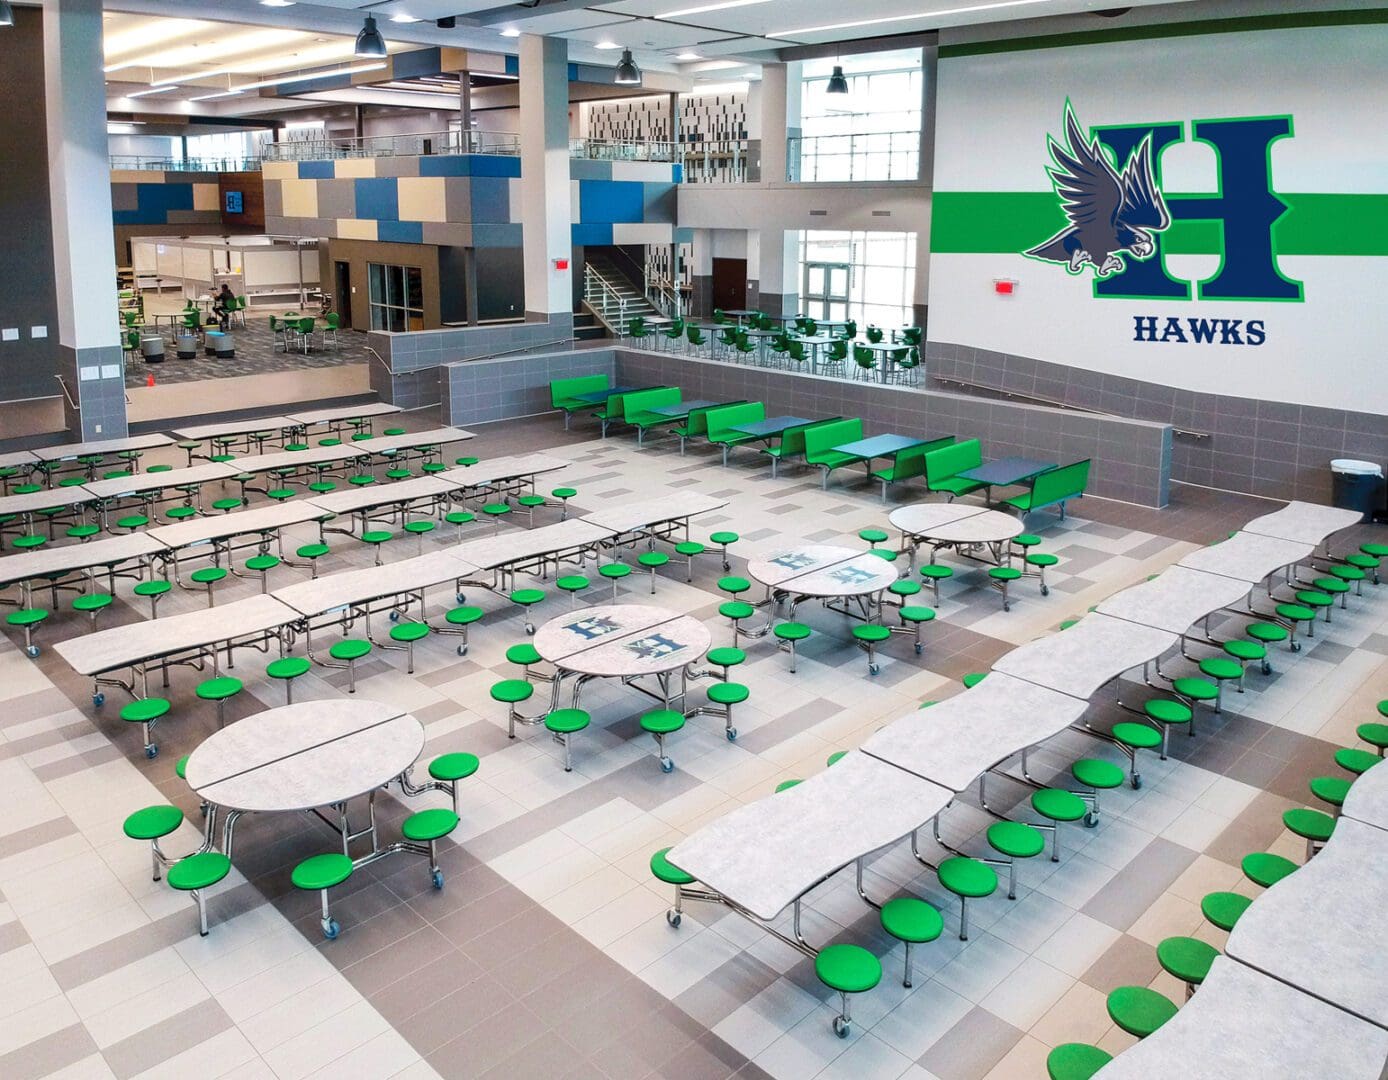 A large cafeteria with green seats and tables.